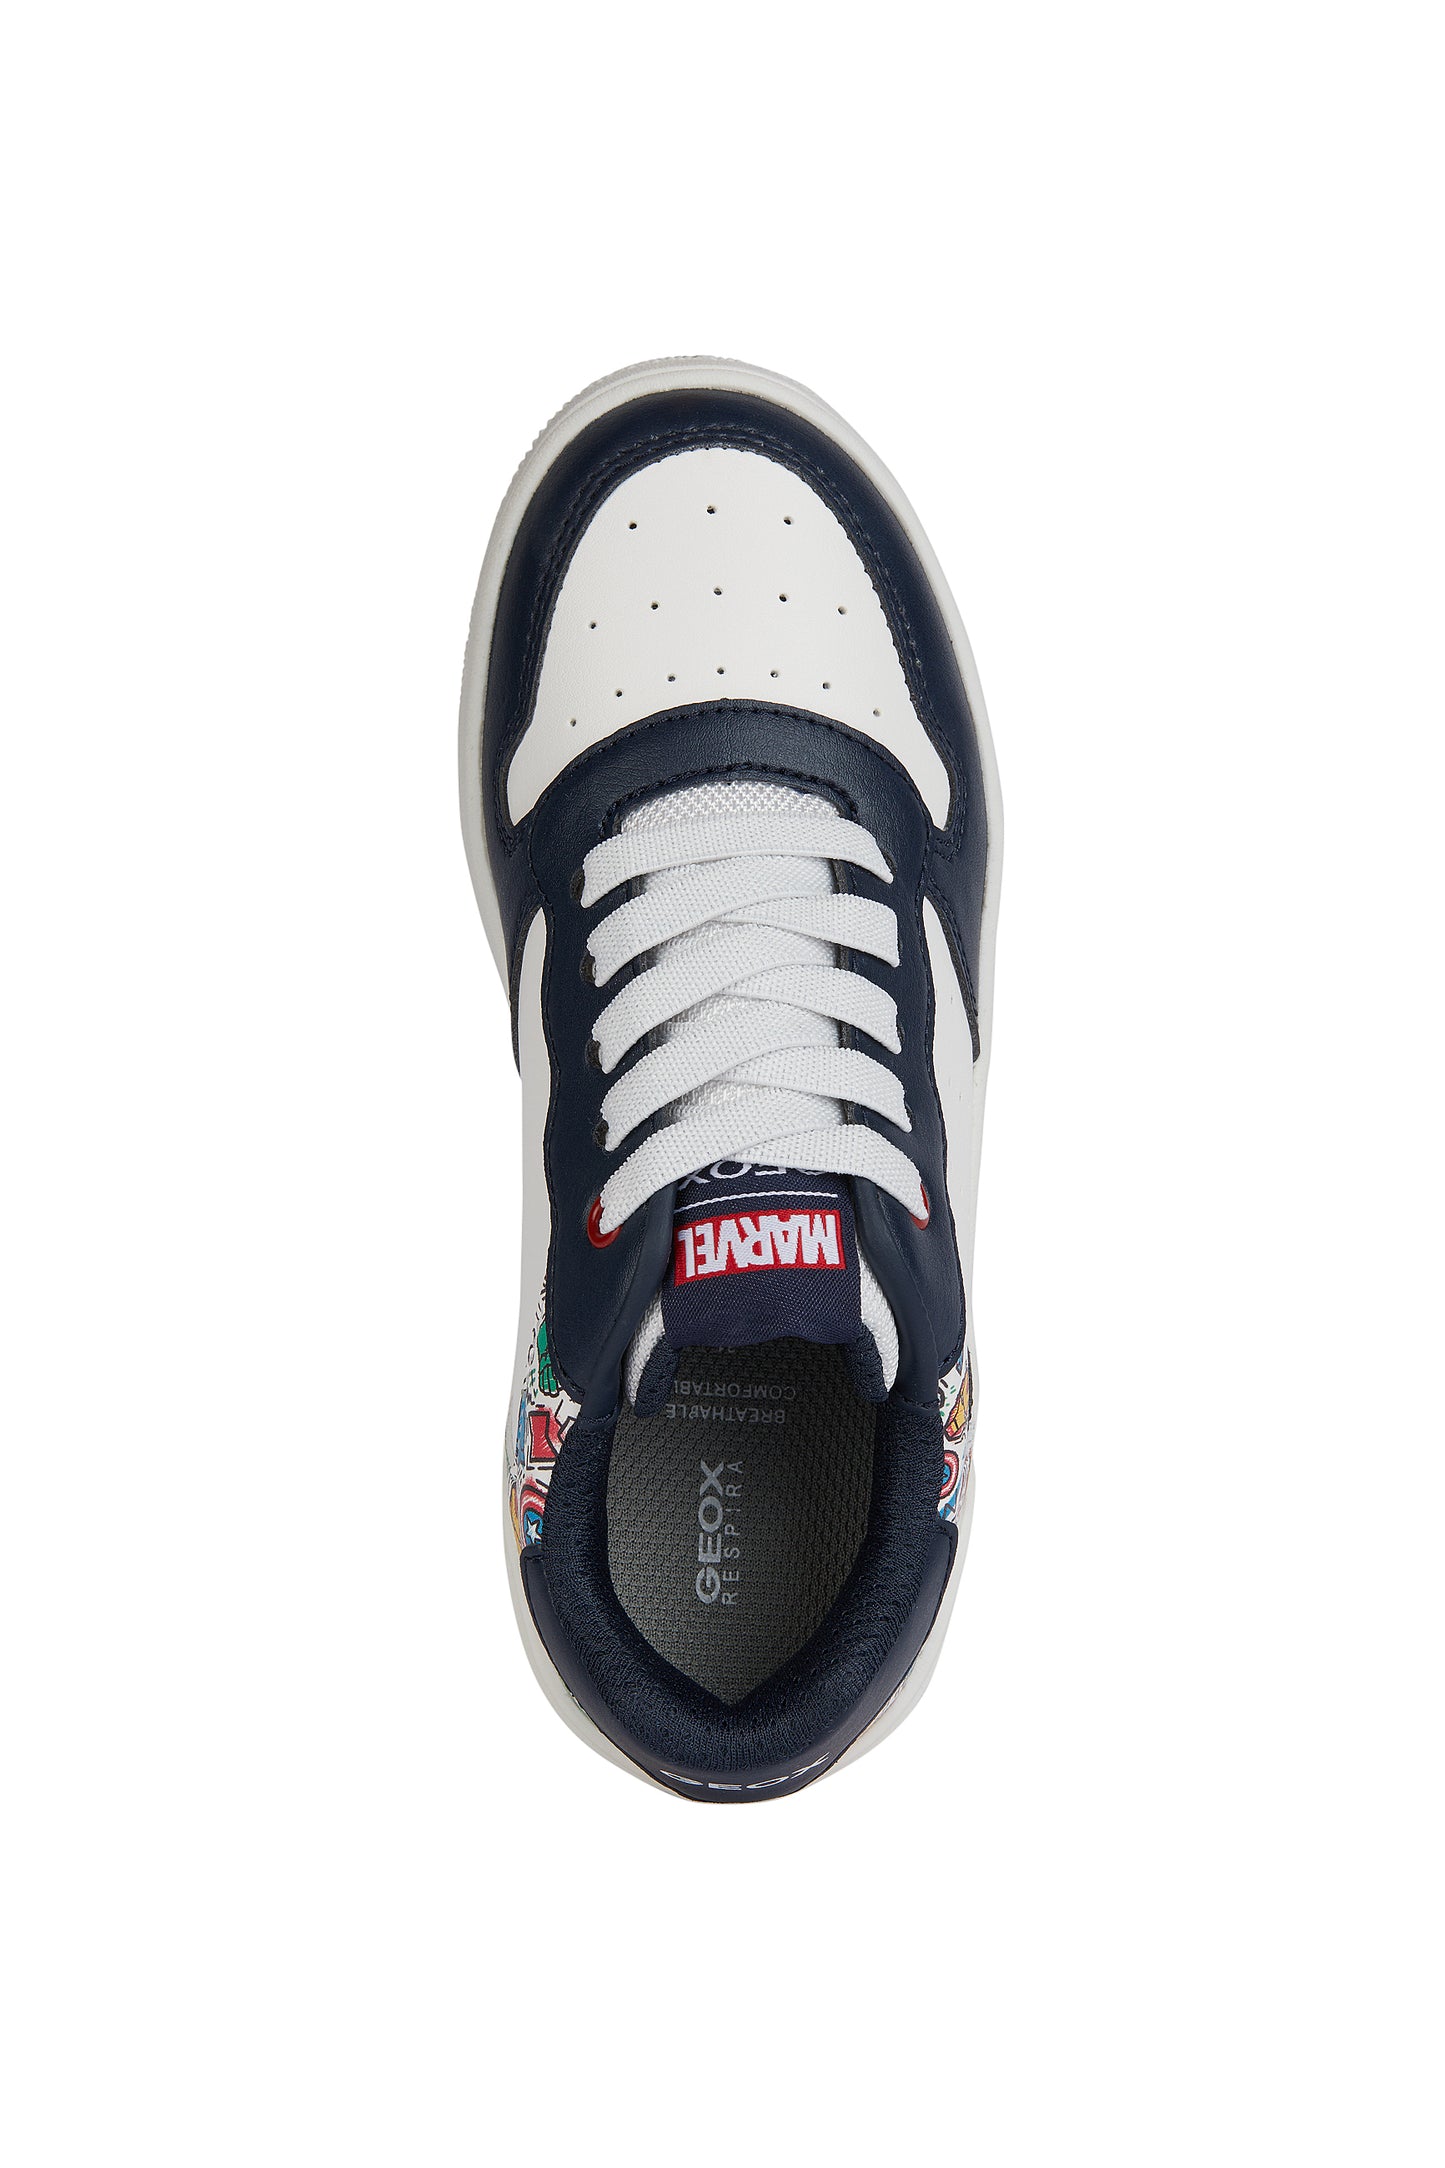 A boys casual trainer by Geox, style J Washiba, in navy and white with avengers print. Lace fastening. View from above.